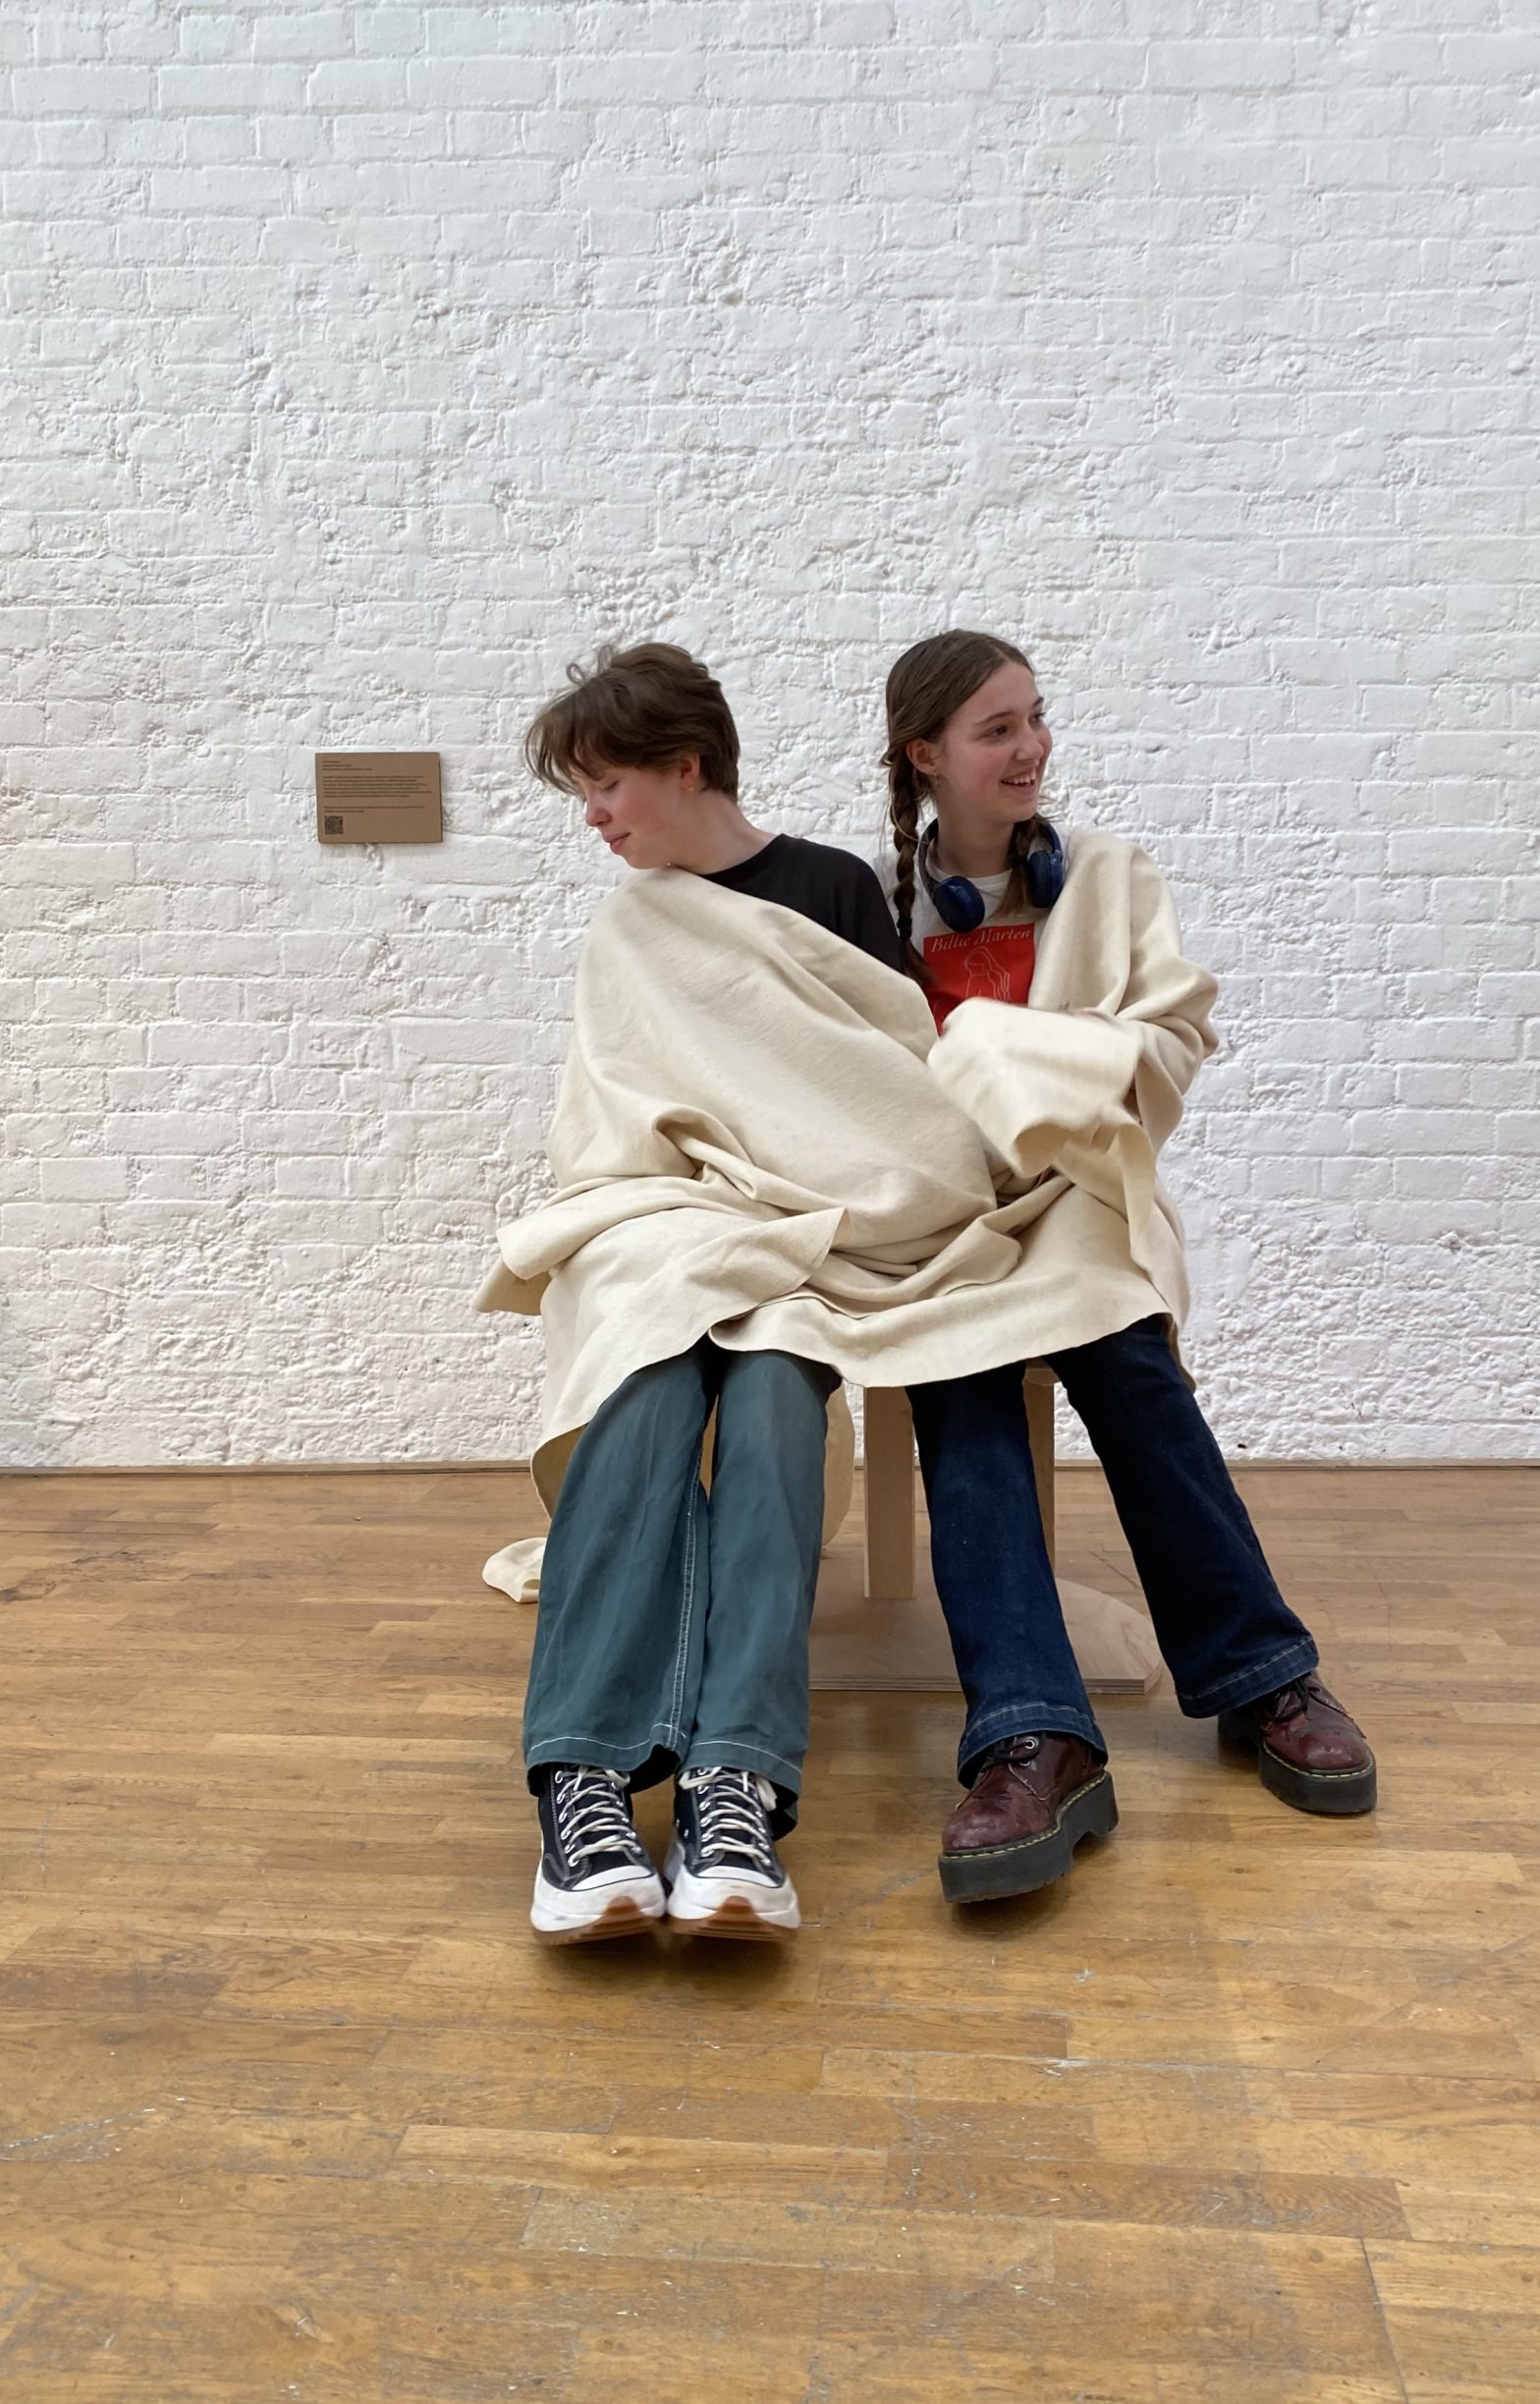 Two young people sitting on a chair that has a built in blanket. They have wrapped the blanket around themselves.